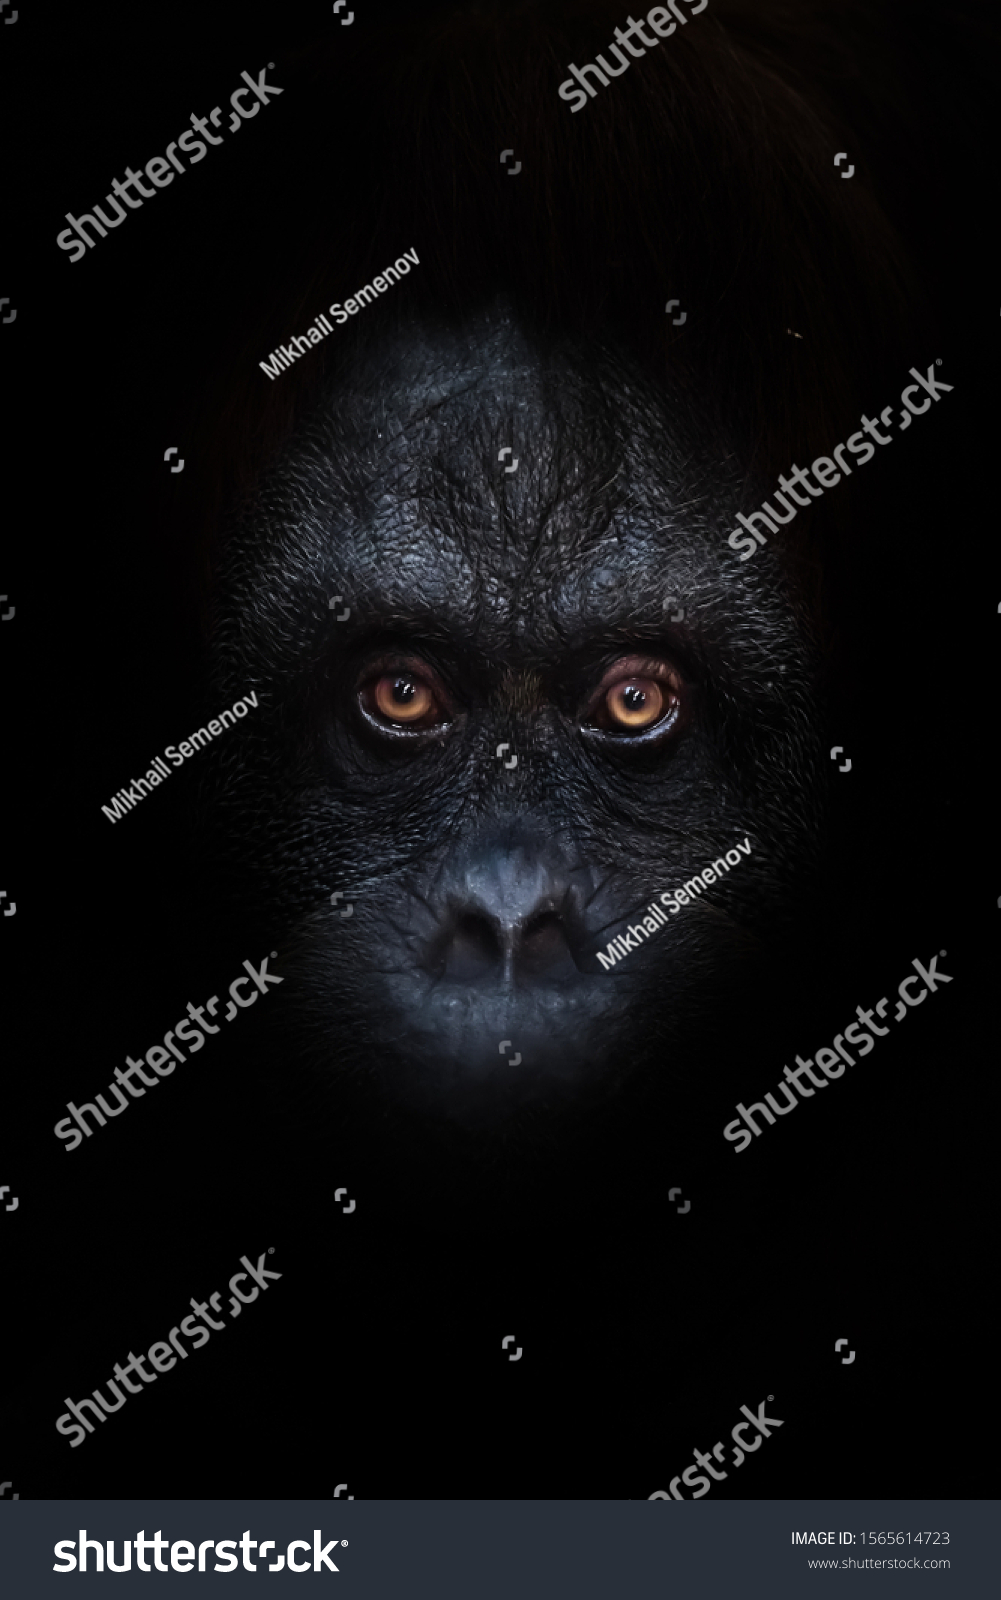 Scary orange luminous eyes on the black face of a monkey in a black night, a frightening look that embodies fears and phobias. #1565614723